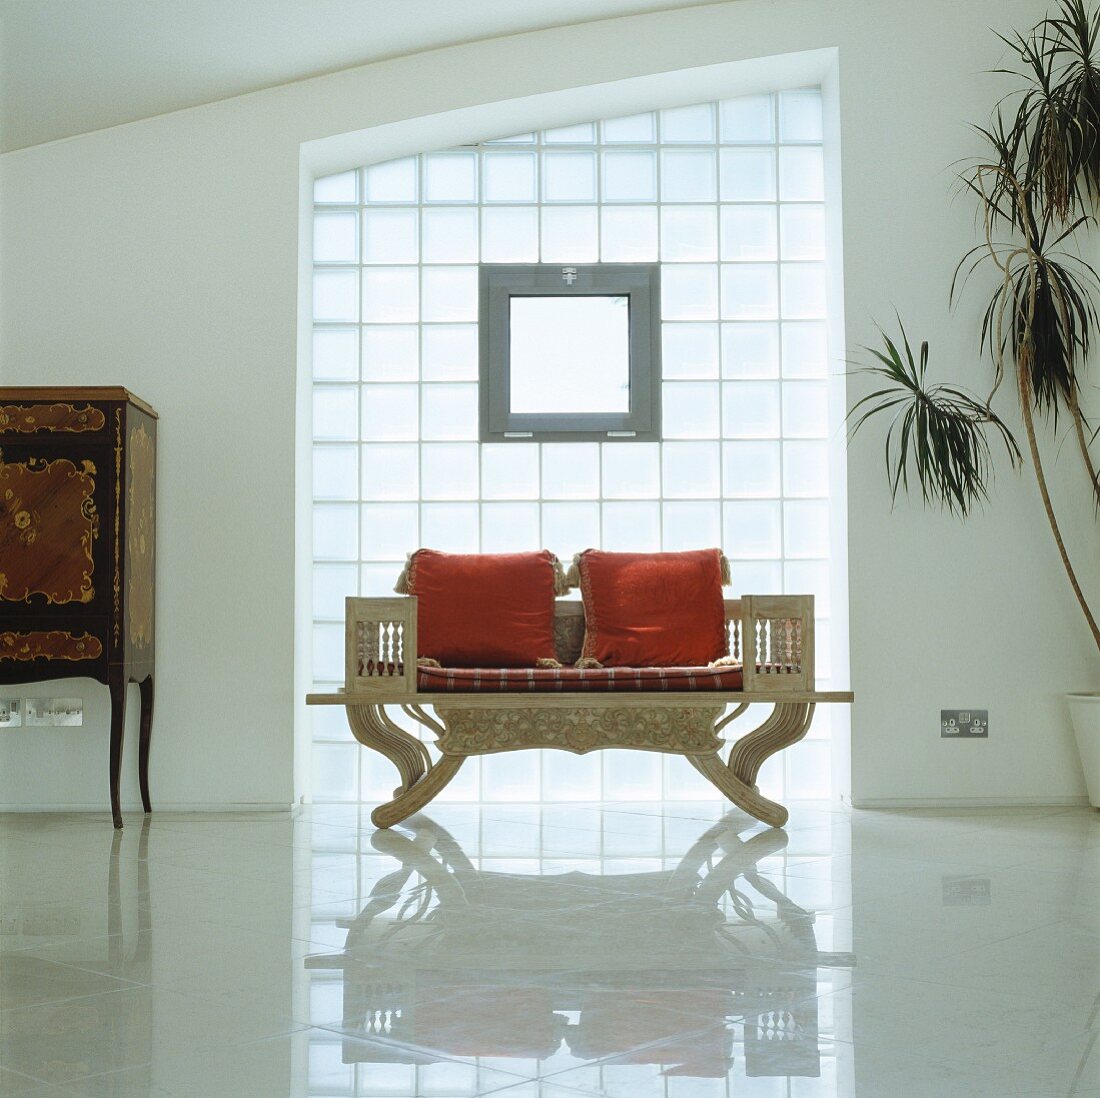 Antique, English bench with red cushion in front of a glass brick wall and reflective tile floor